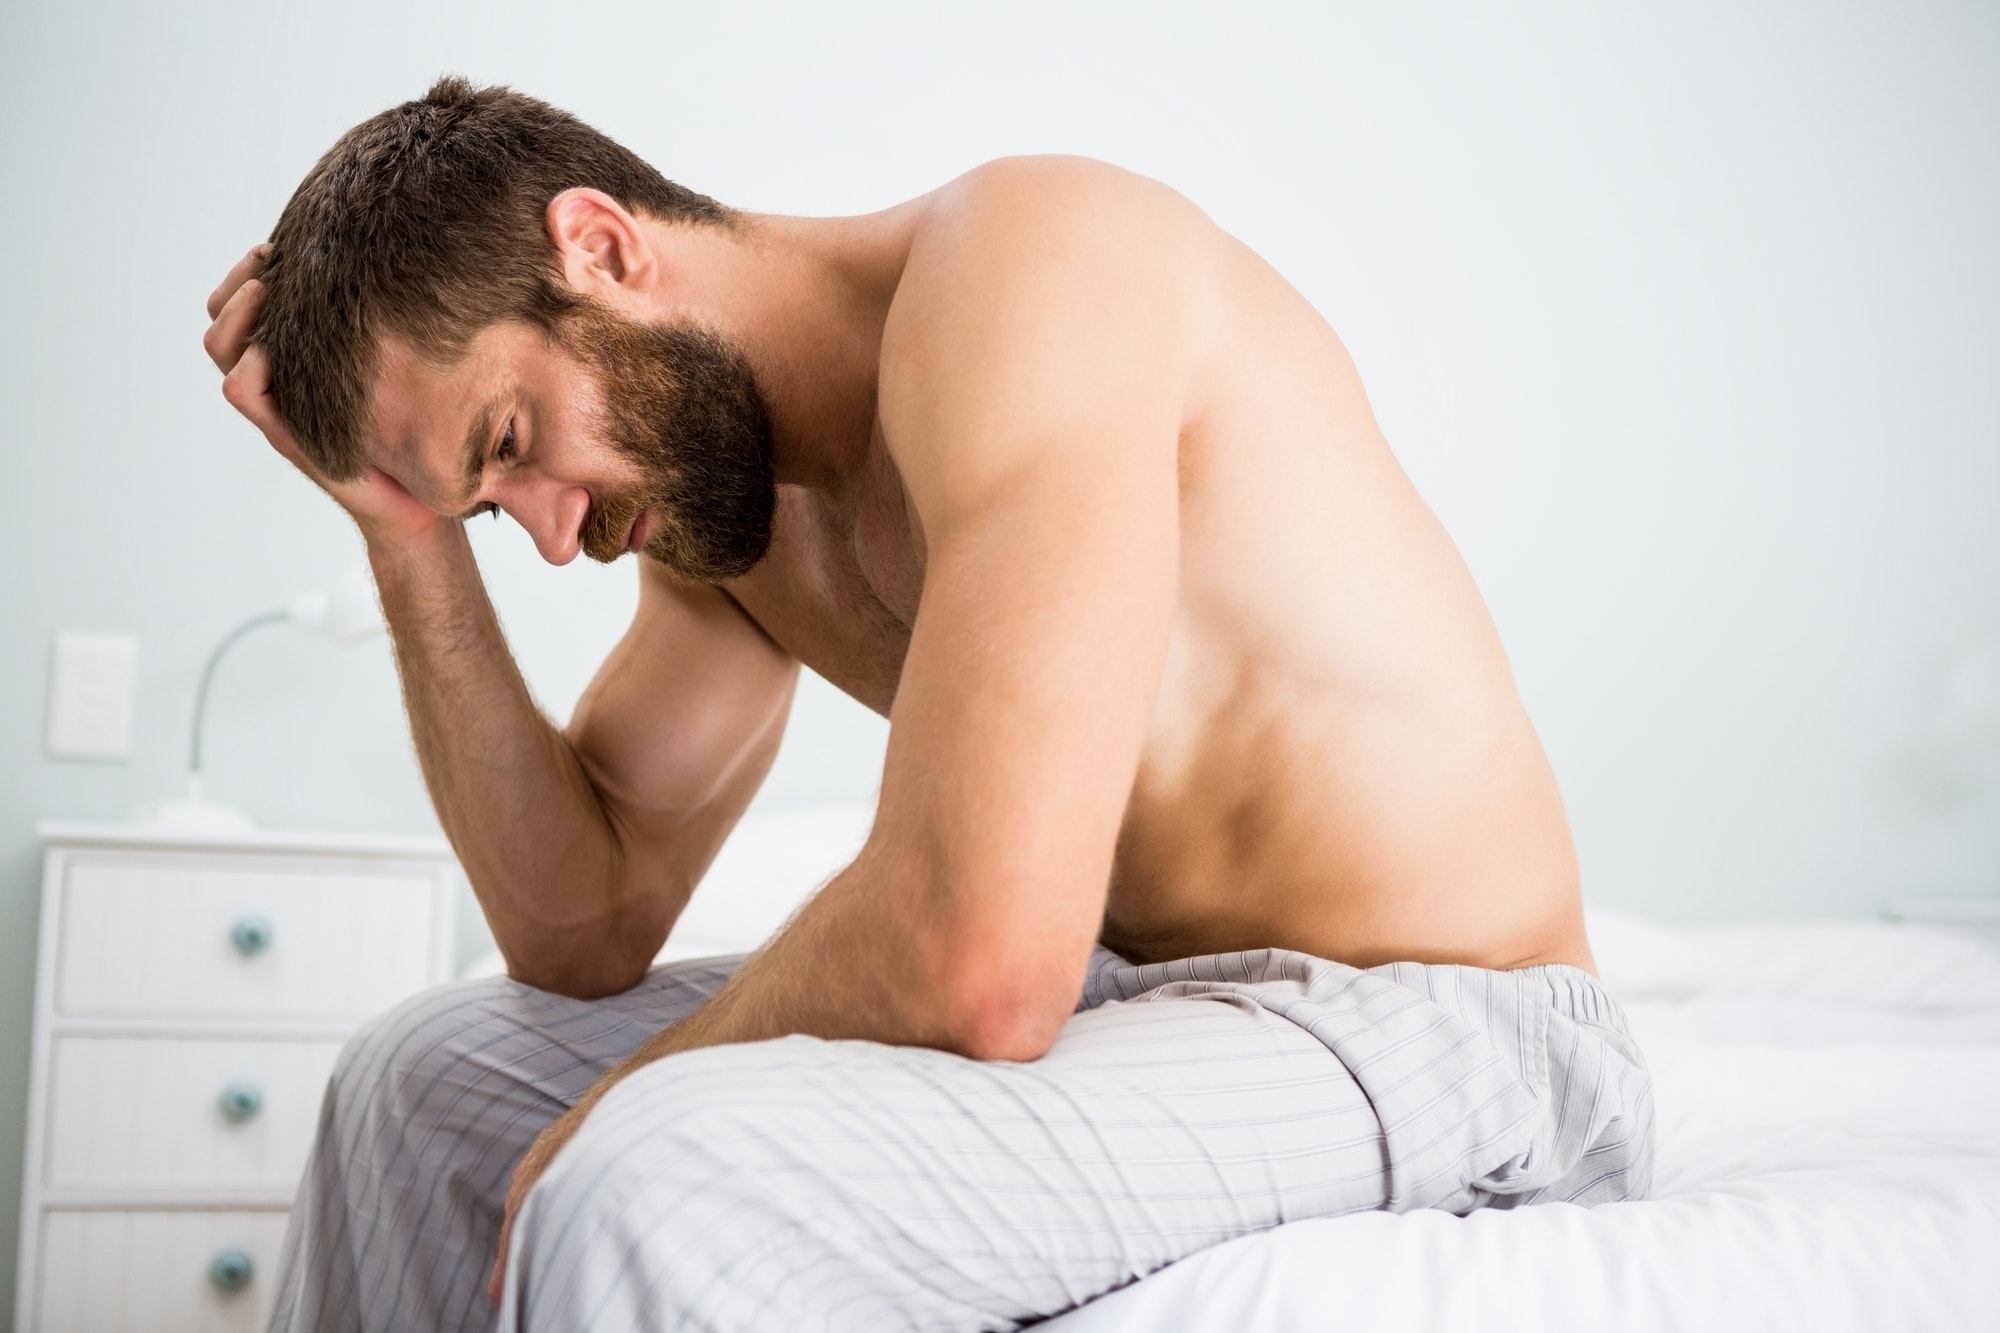 Depressed man on bed with hand on head